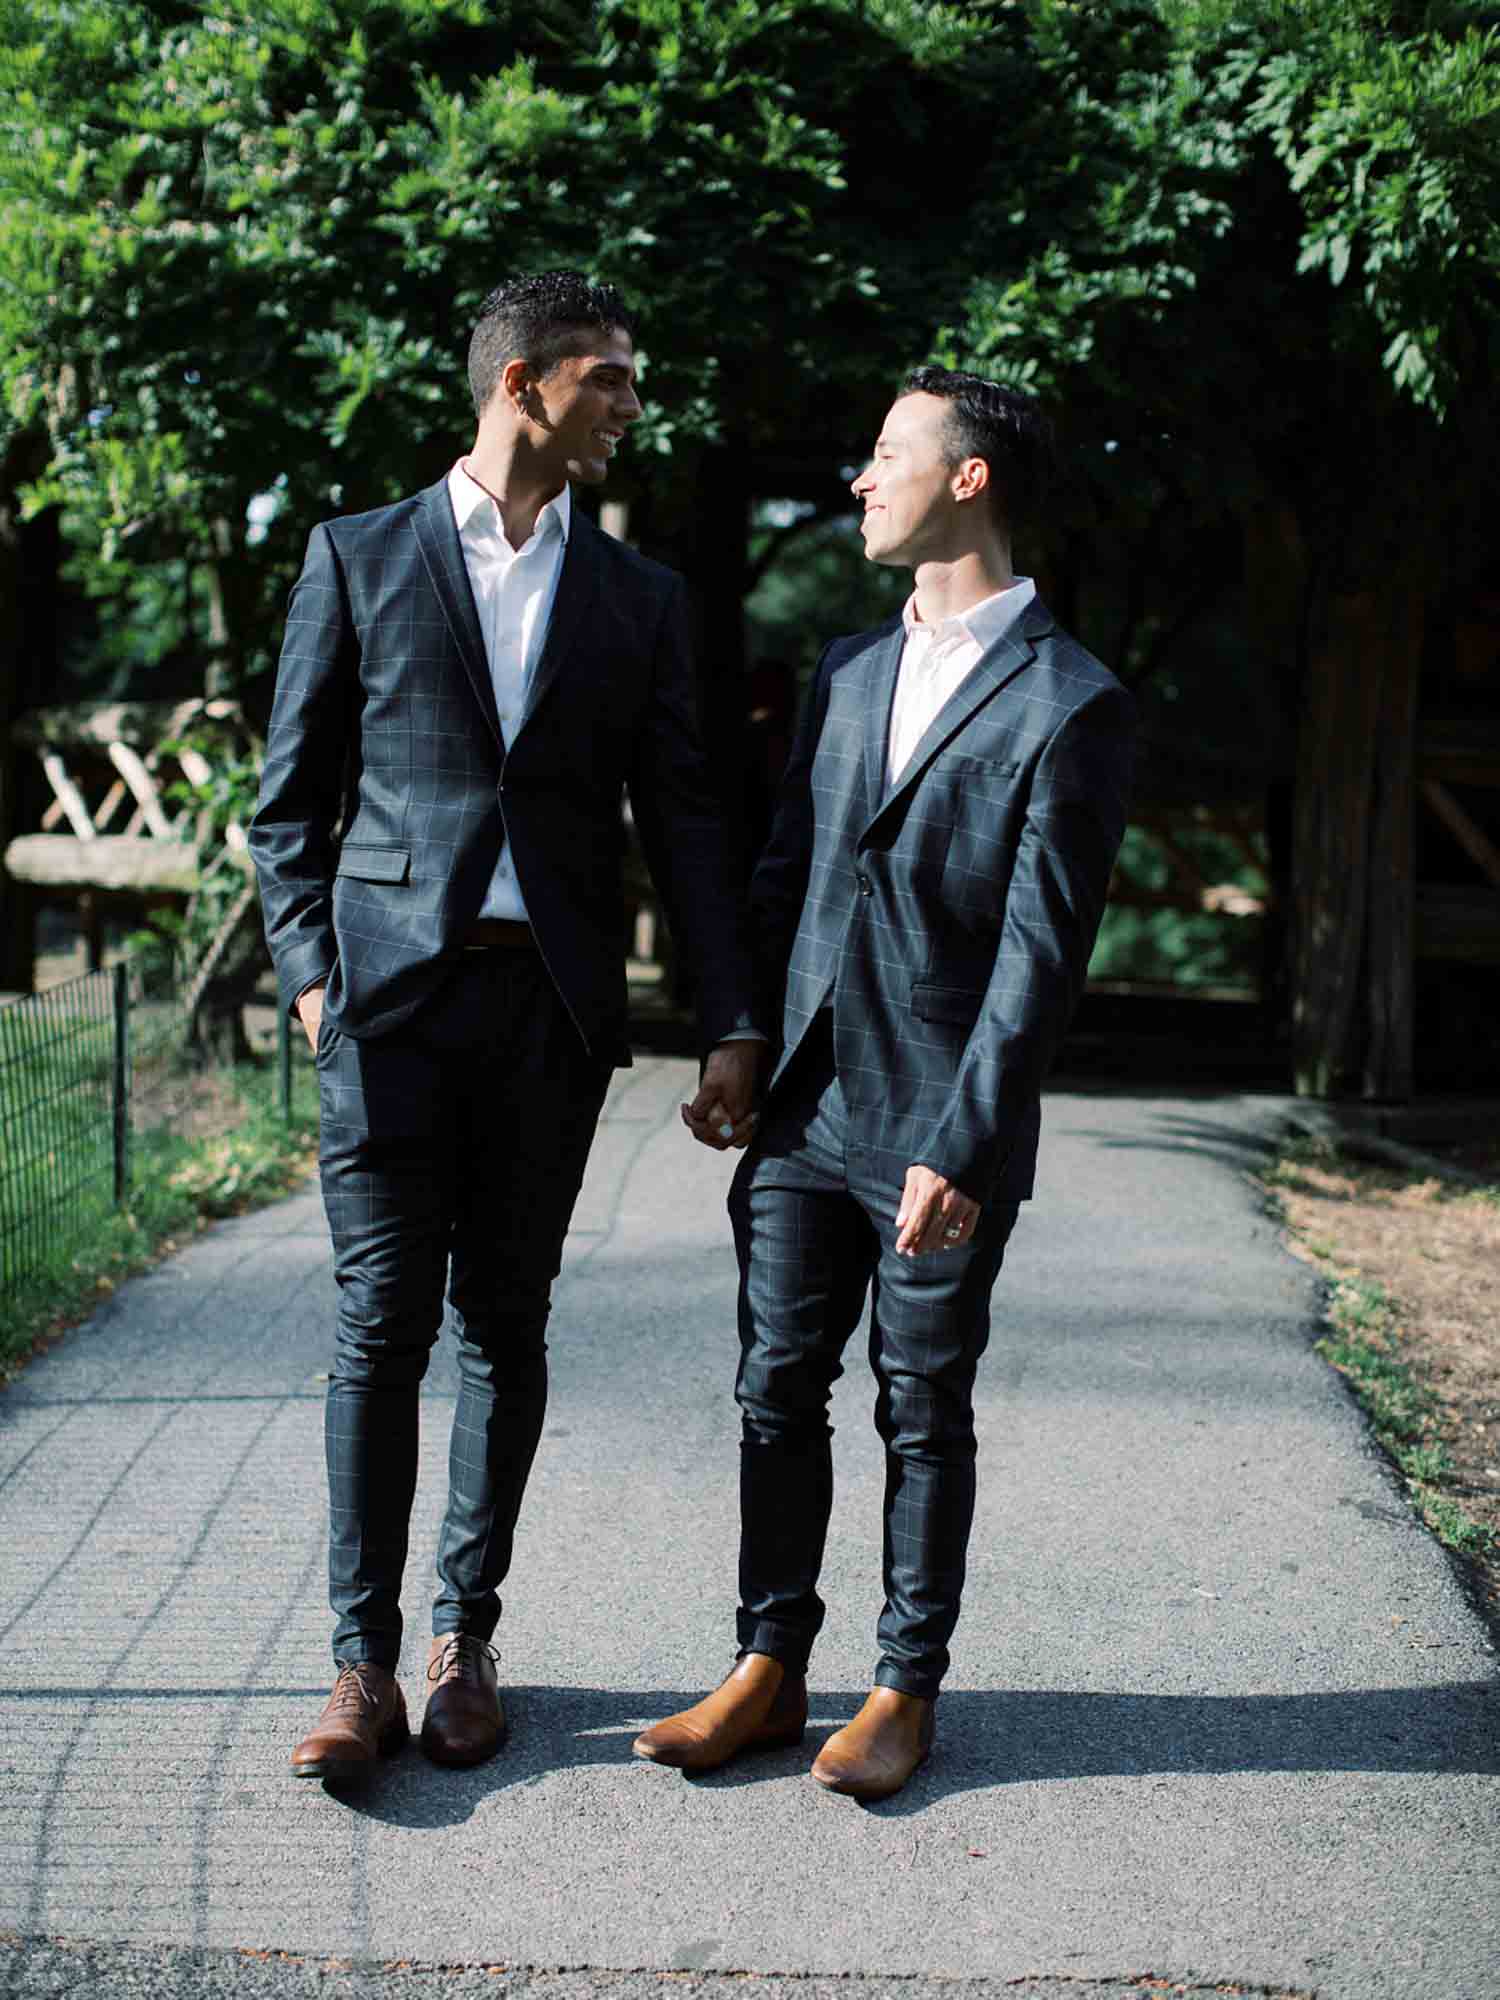 Spring elopement in central park with drag queen officiant | Judson Rappaport Photography | Featured on Equally Wed, the leading LGBTQ+ wedding magazine